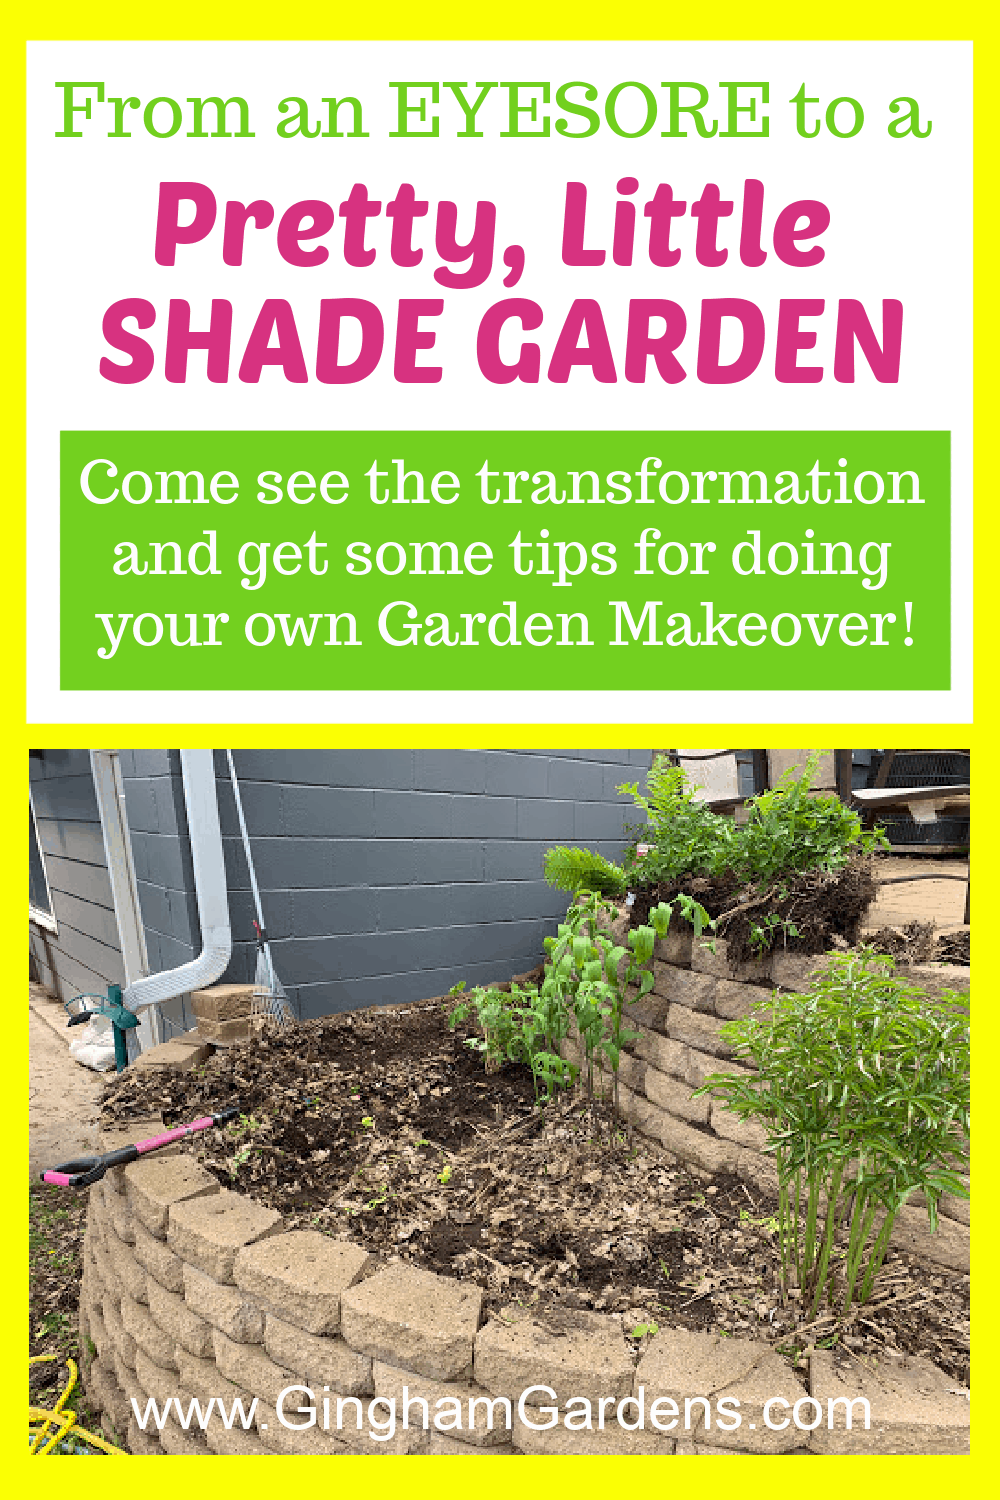 Image of a garden project with text overlay - From an eyesore to a pretty little shade garden